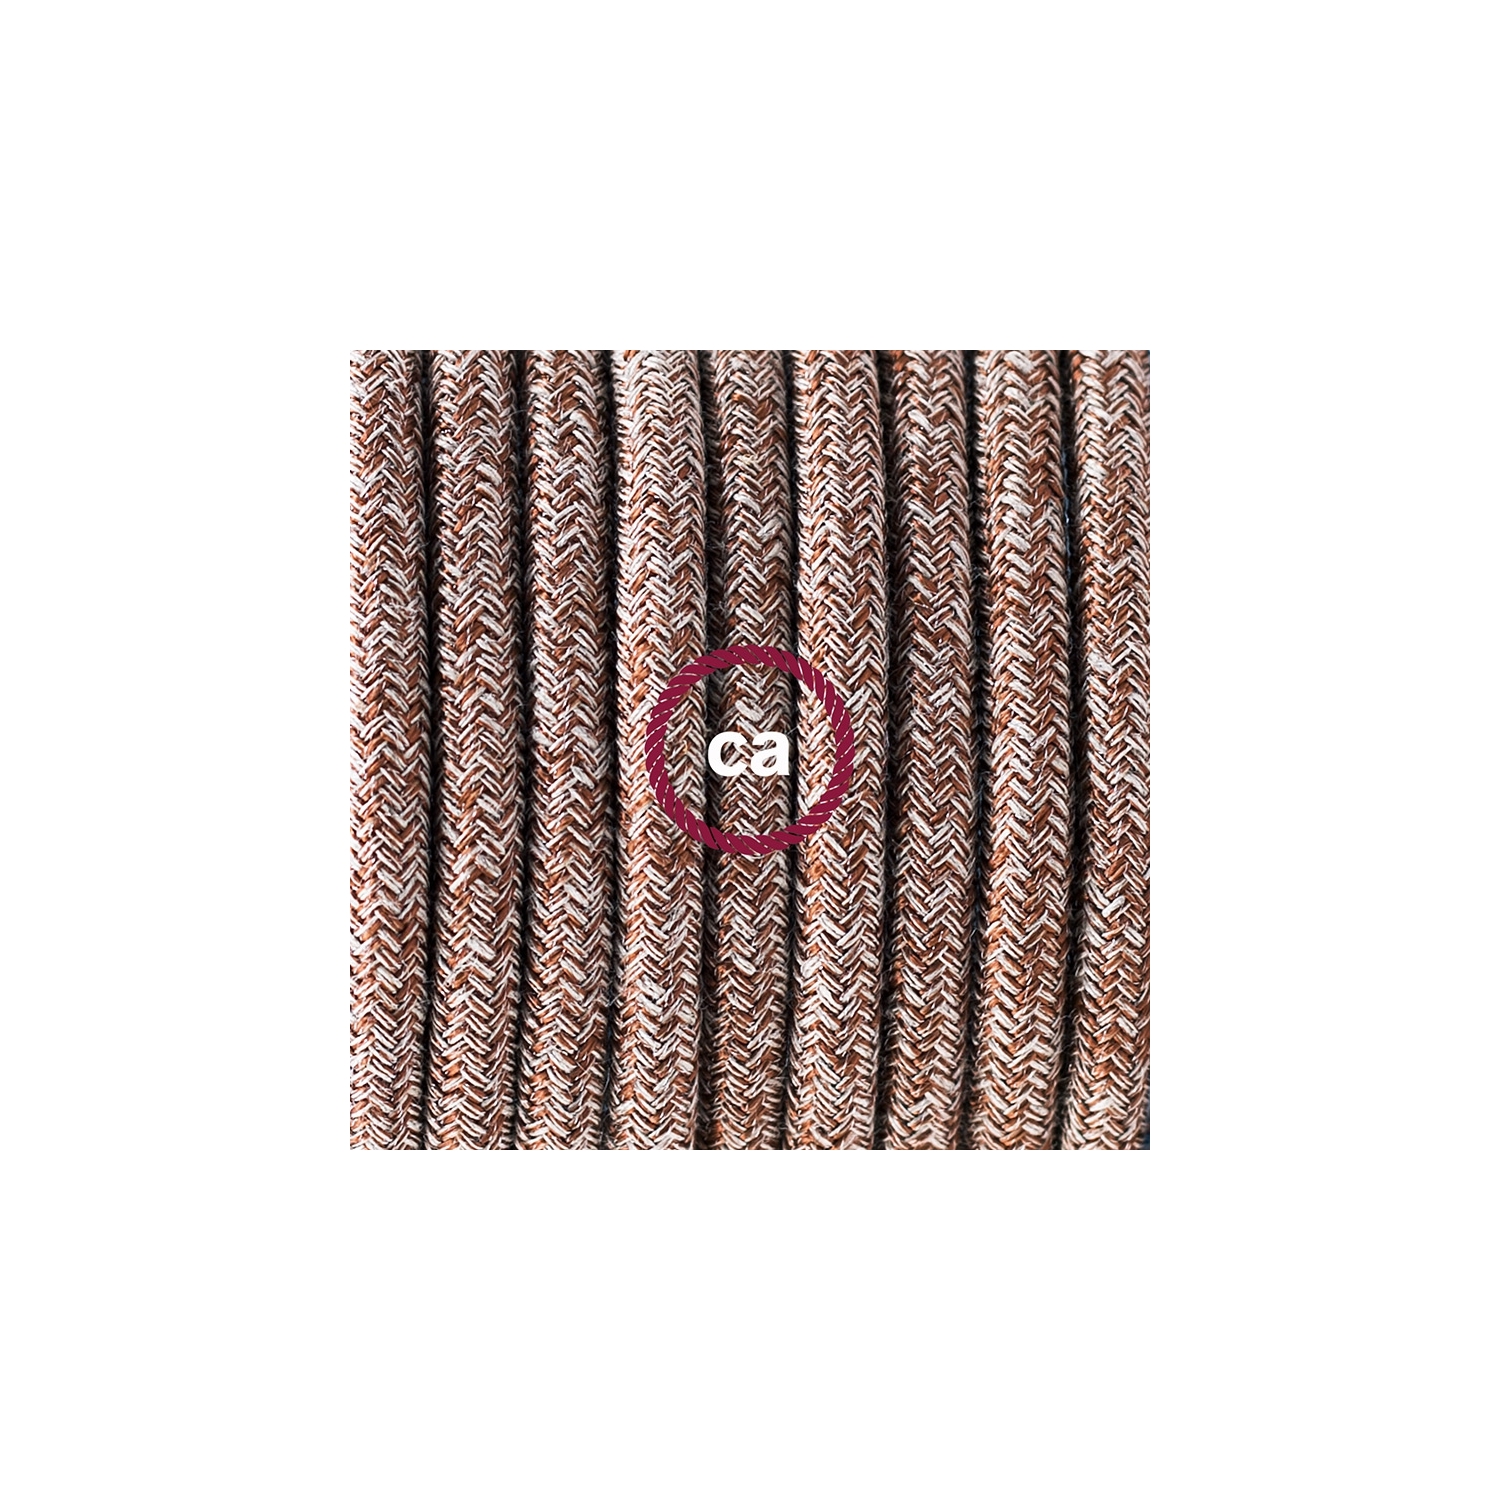 Plug-in Pendant with switch on socket | RS82 Brown Glitter Cotton & Natural Linen Tweed